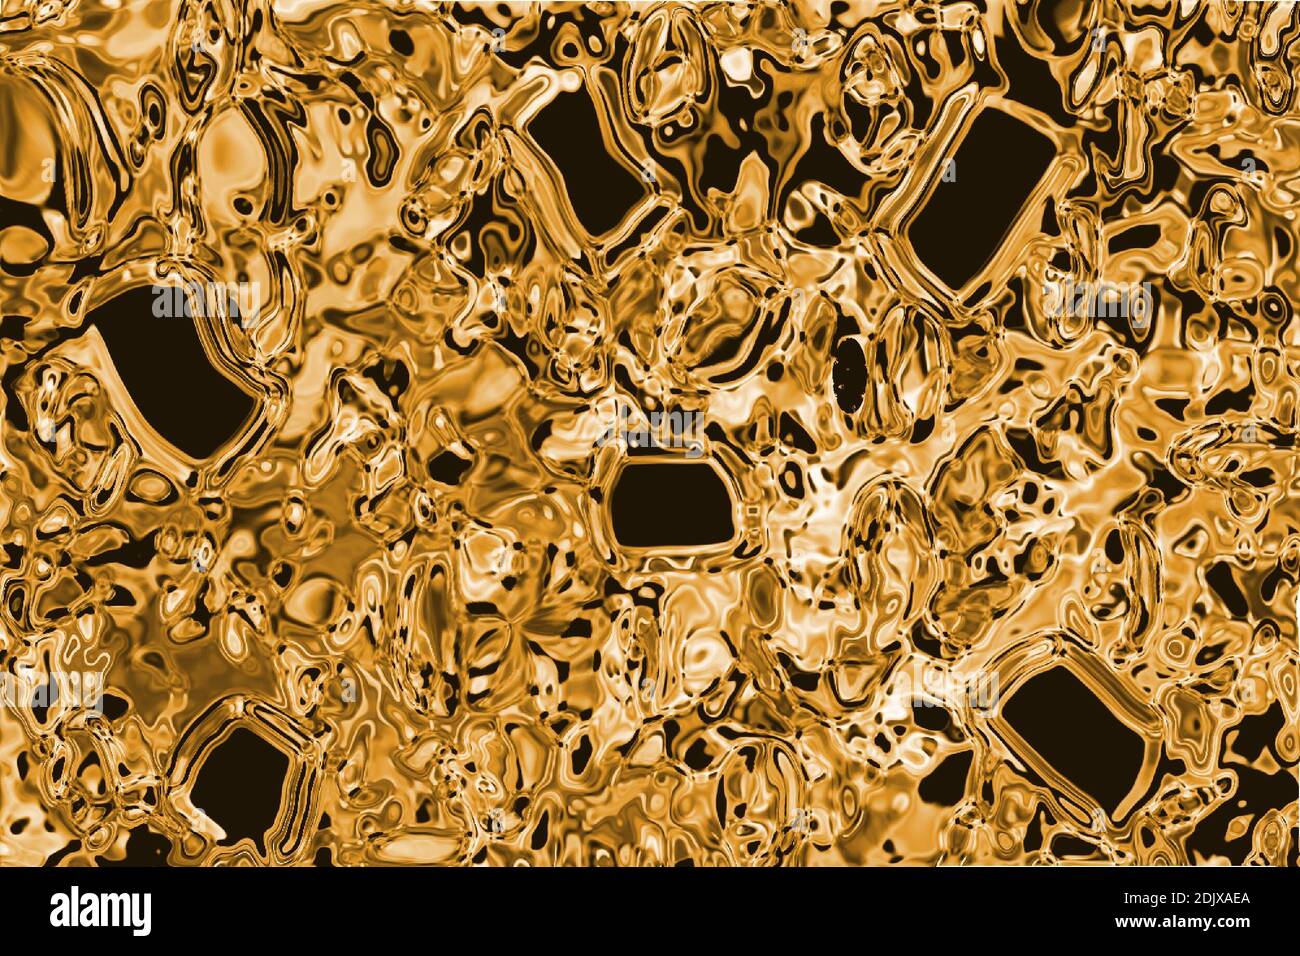 Texture Of Pure Gold With Tourmaline Inlays, Background For Wallpaper,  Decoration Or Design Works Stock Photo - Alamy